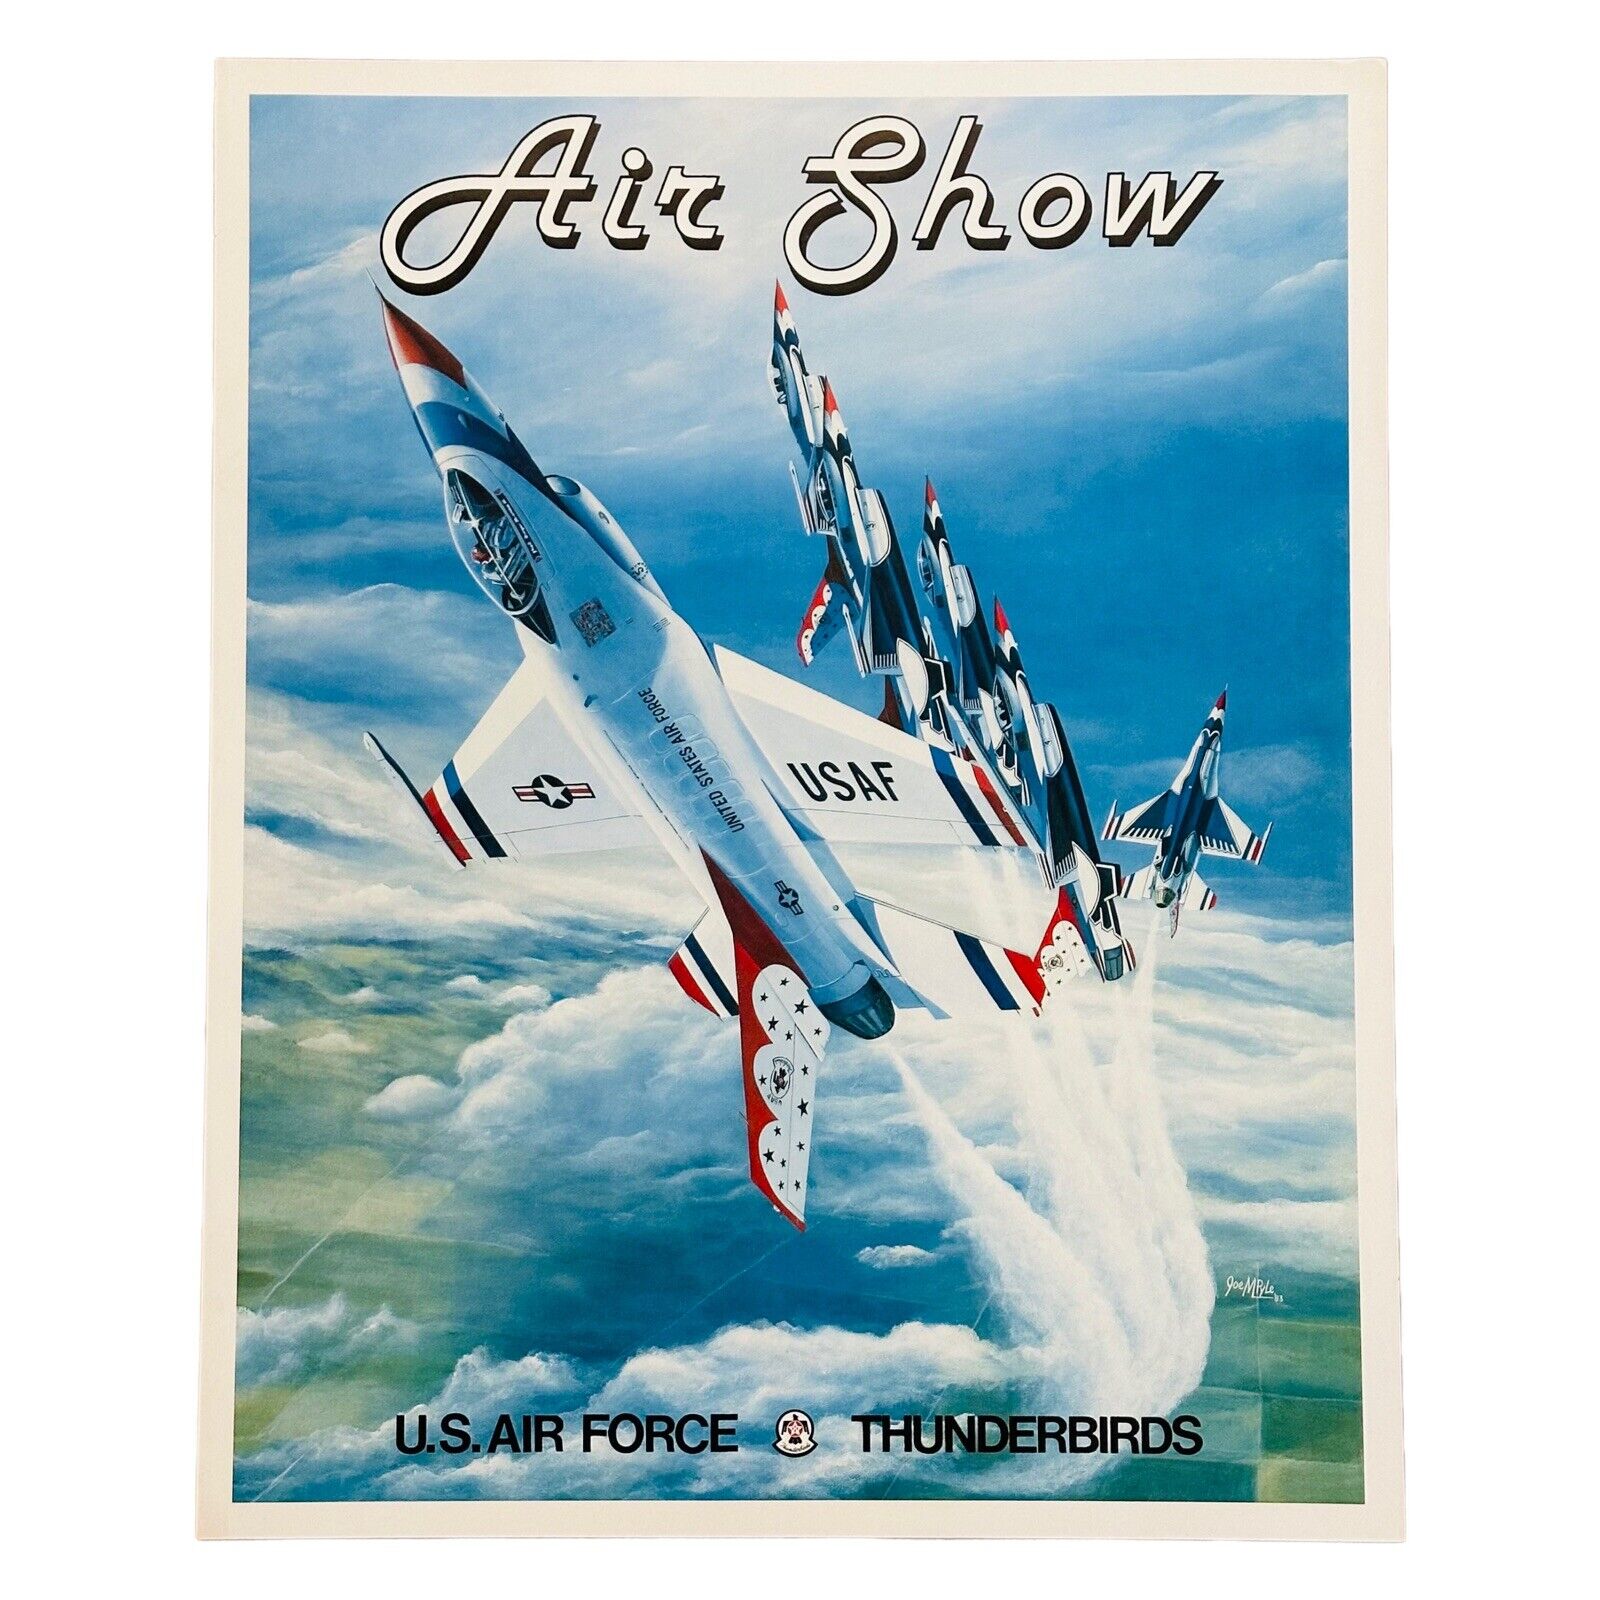 Vintage 1983 USAF THUNDERBIRDS AIR SHOW Poster F-16A Fighting Falcon Joe M. Pyle